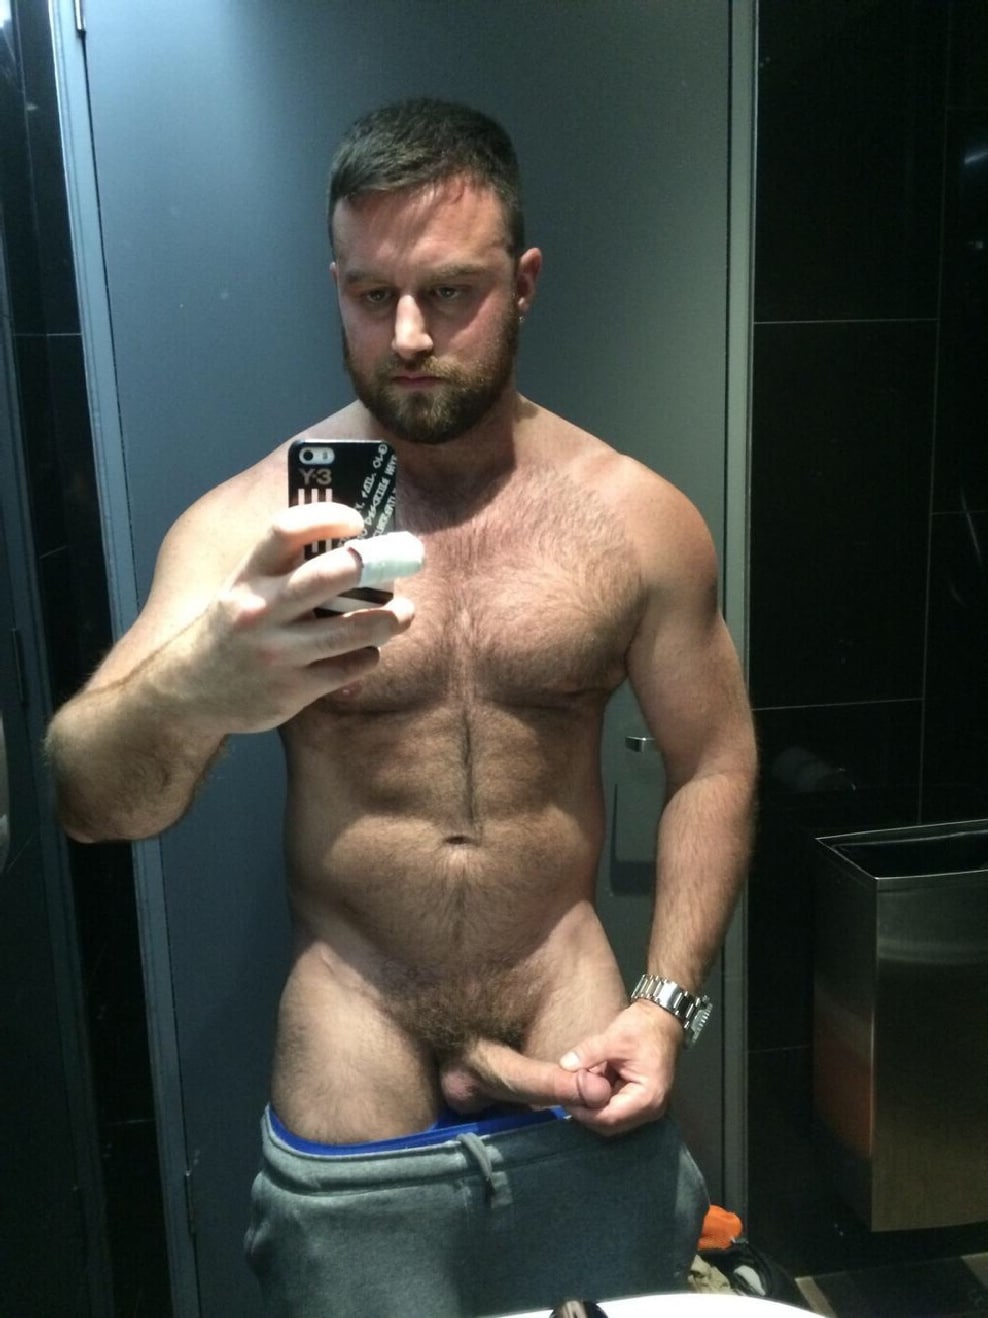 hairy muscle cock selfie naked photo